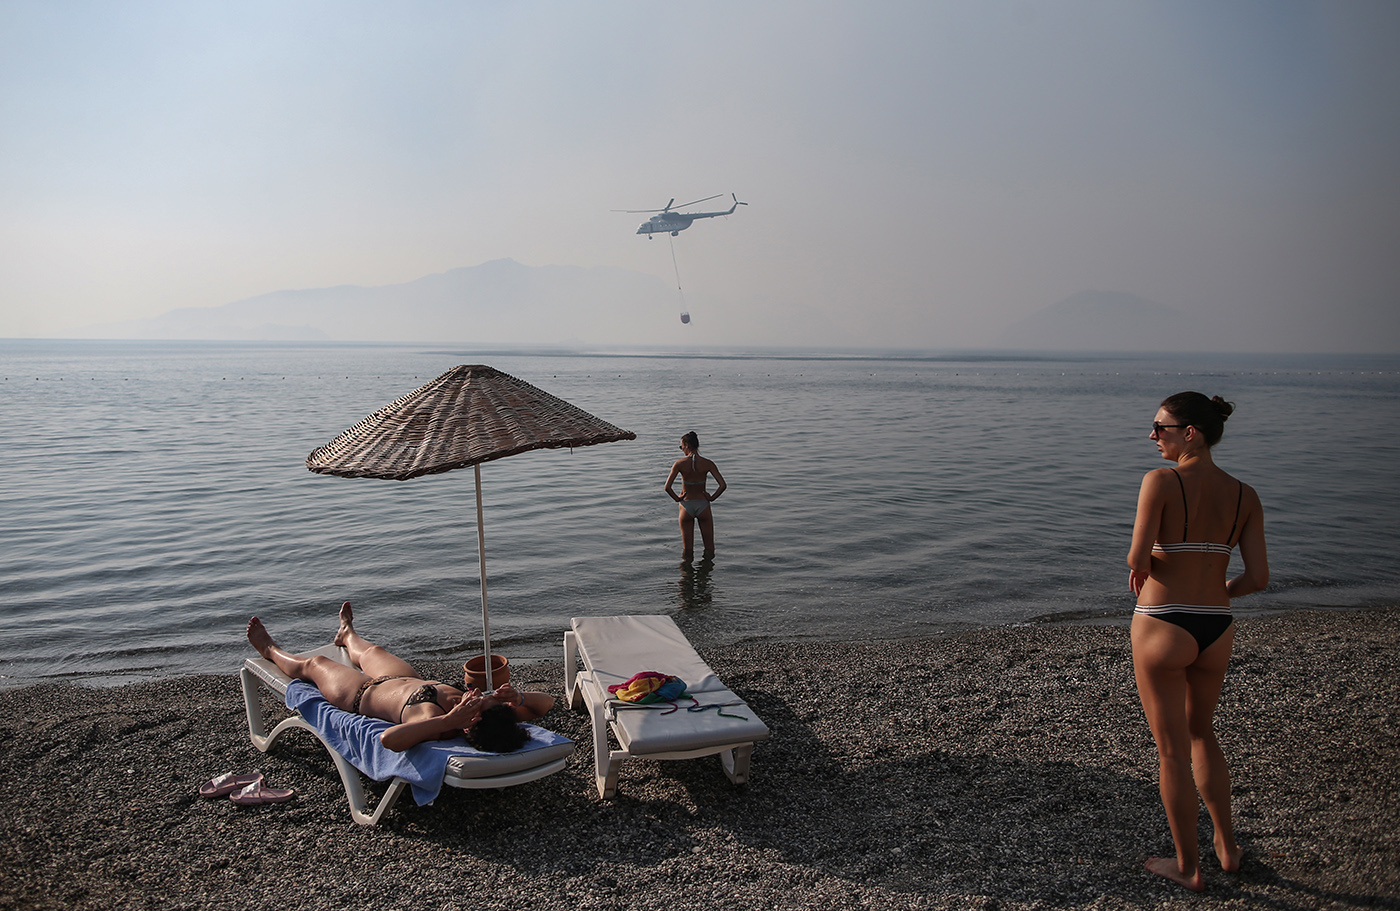 A helicopter get water from sea to put out the wildfires as tourists enjoy near the sea Marmaris district of Mugla, Turkey, 31 July 2021. According to a statement by the Turkish government